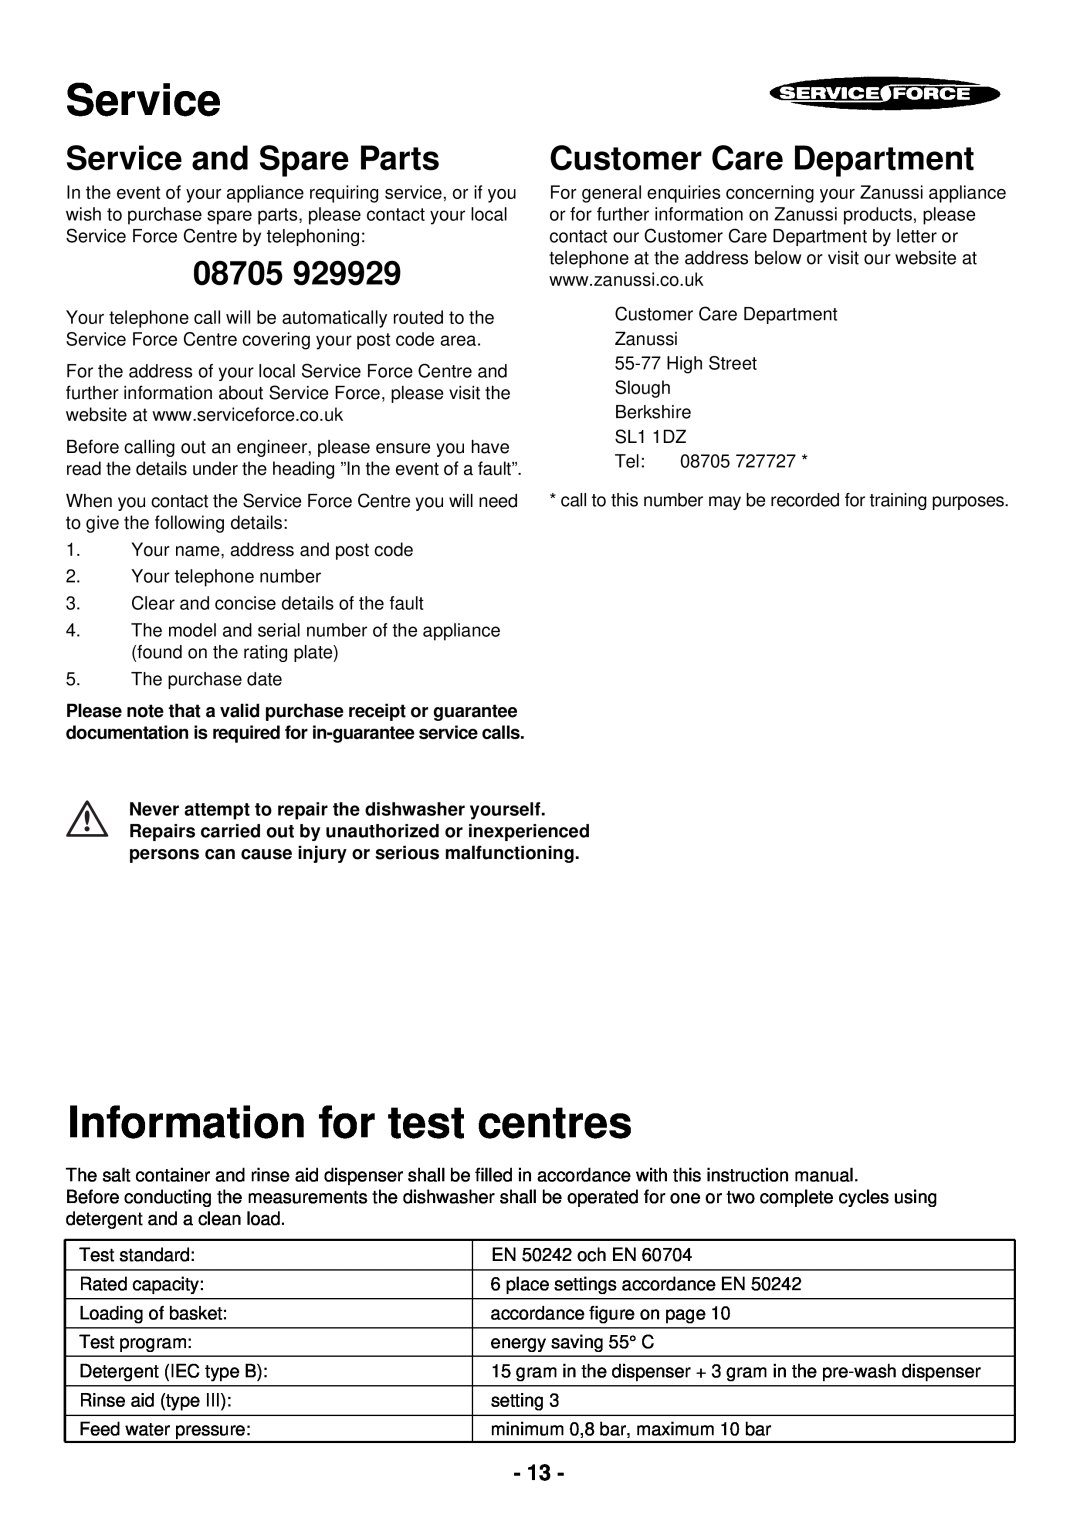 Zanussi DCE 5655 manual Information for test centres, Service and Spare Parts, 08705, Customer Care Department 